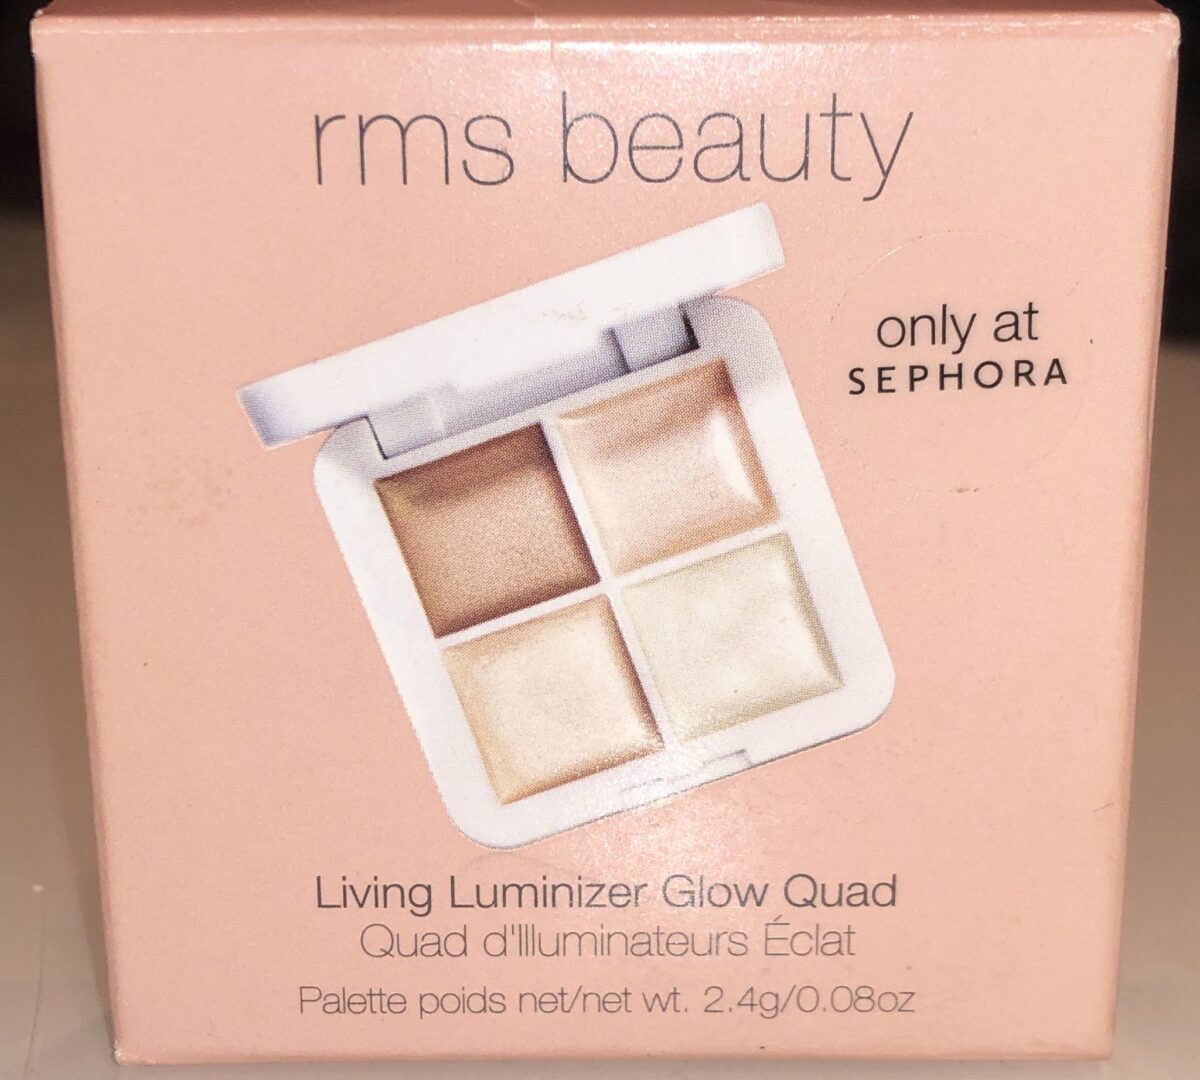 THE FRONT OF THE RMS LIVING LUMINIZER GLOW QUAD MINI